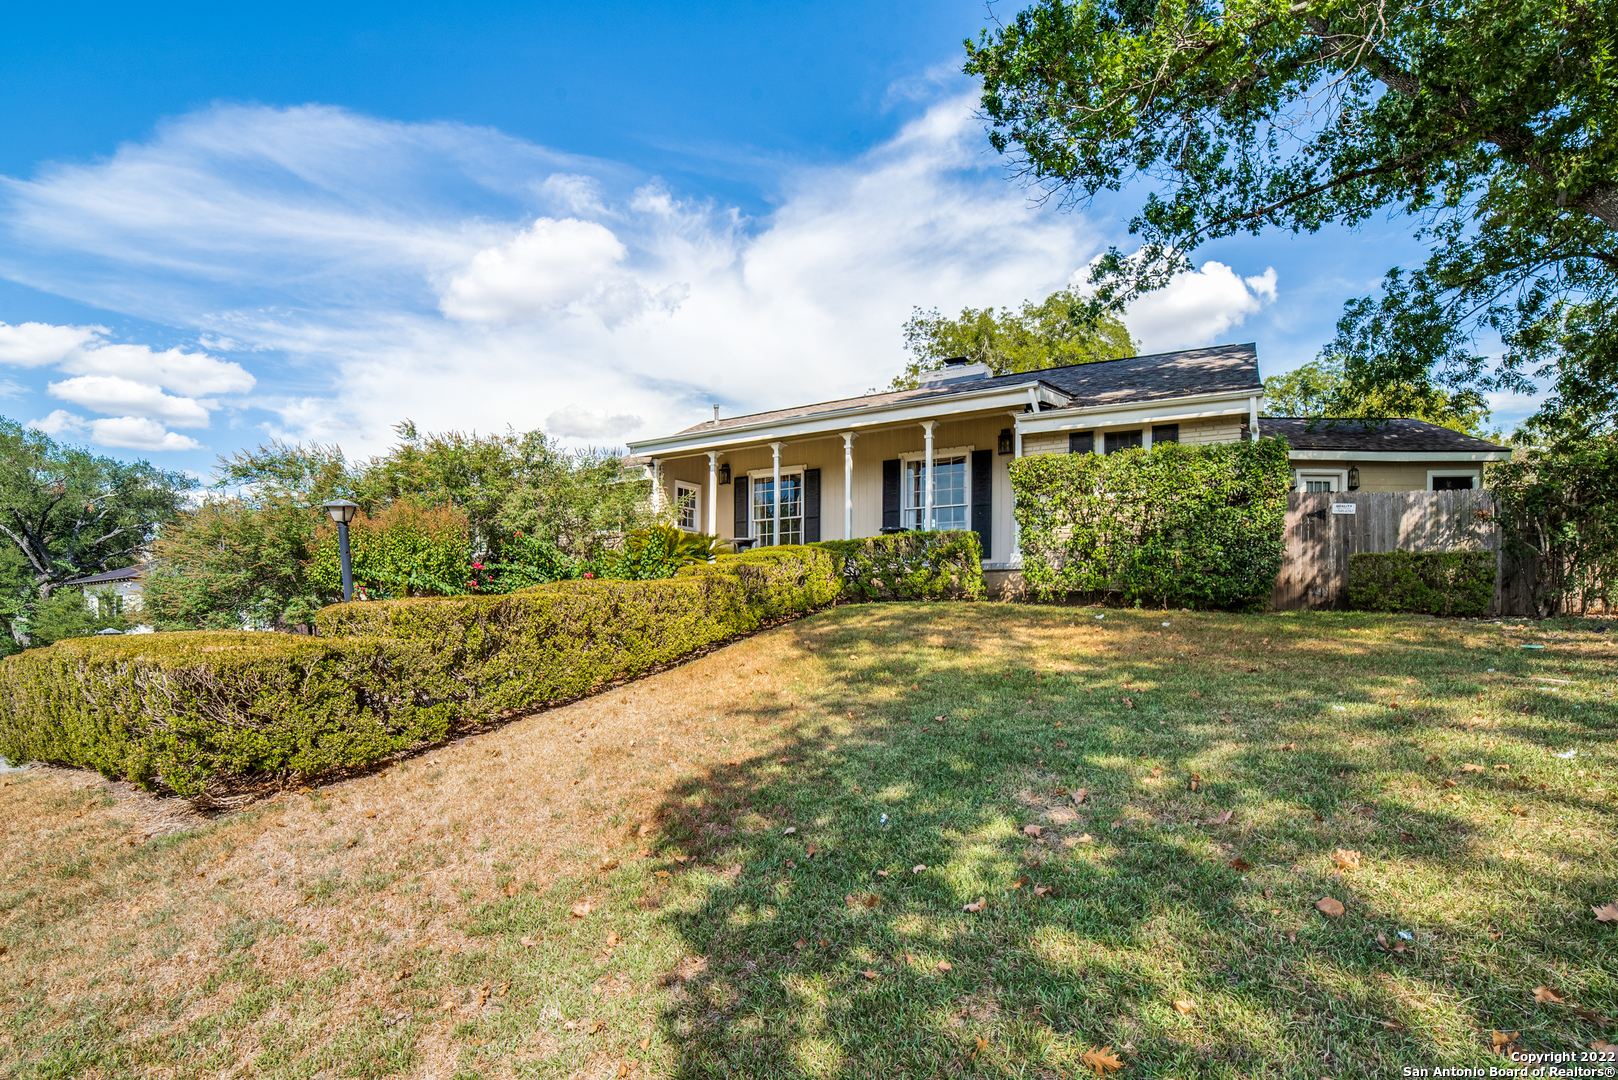 This lovely Terrell Hills home is on slightly more than a half acre and positioned on a beautiful sloping lot with a west view. Whether the goal is to build new or remodel, this location is central and convenient to Ft. Sam, downtown, major highways, the airport, Pearl, and The Quarry.